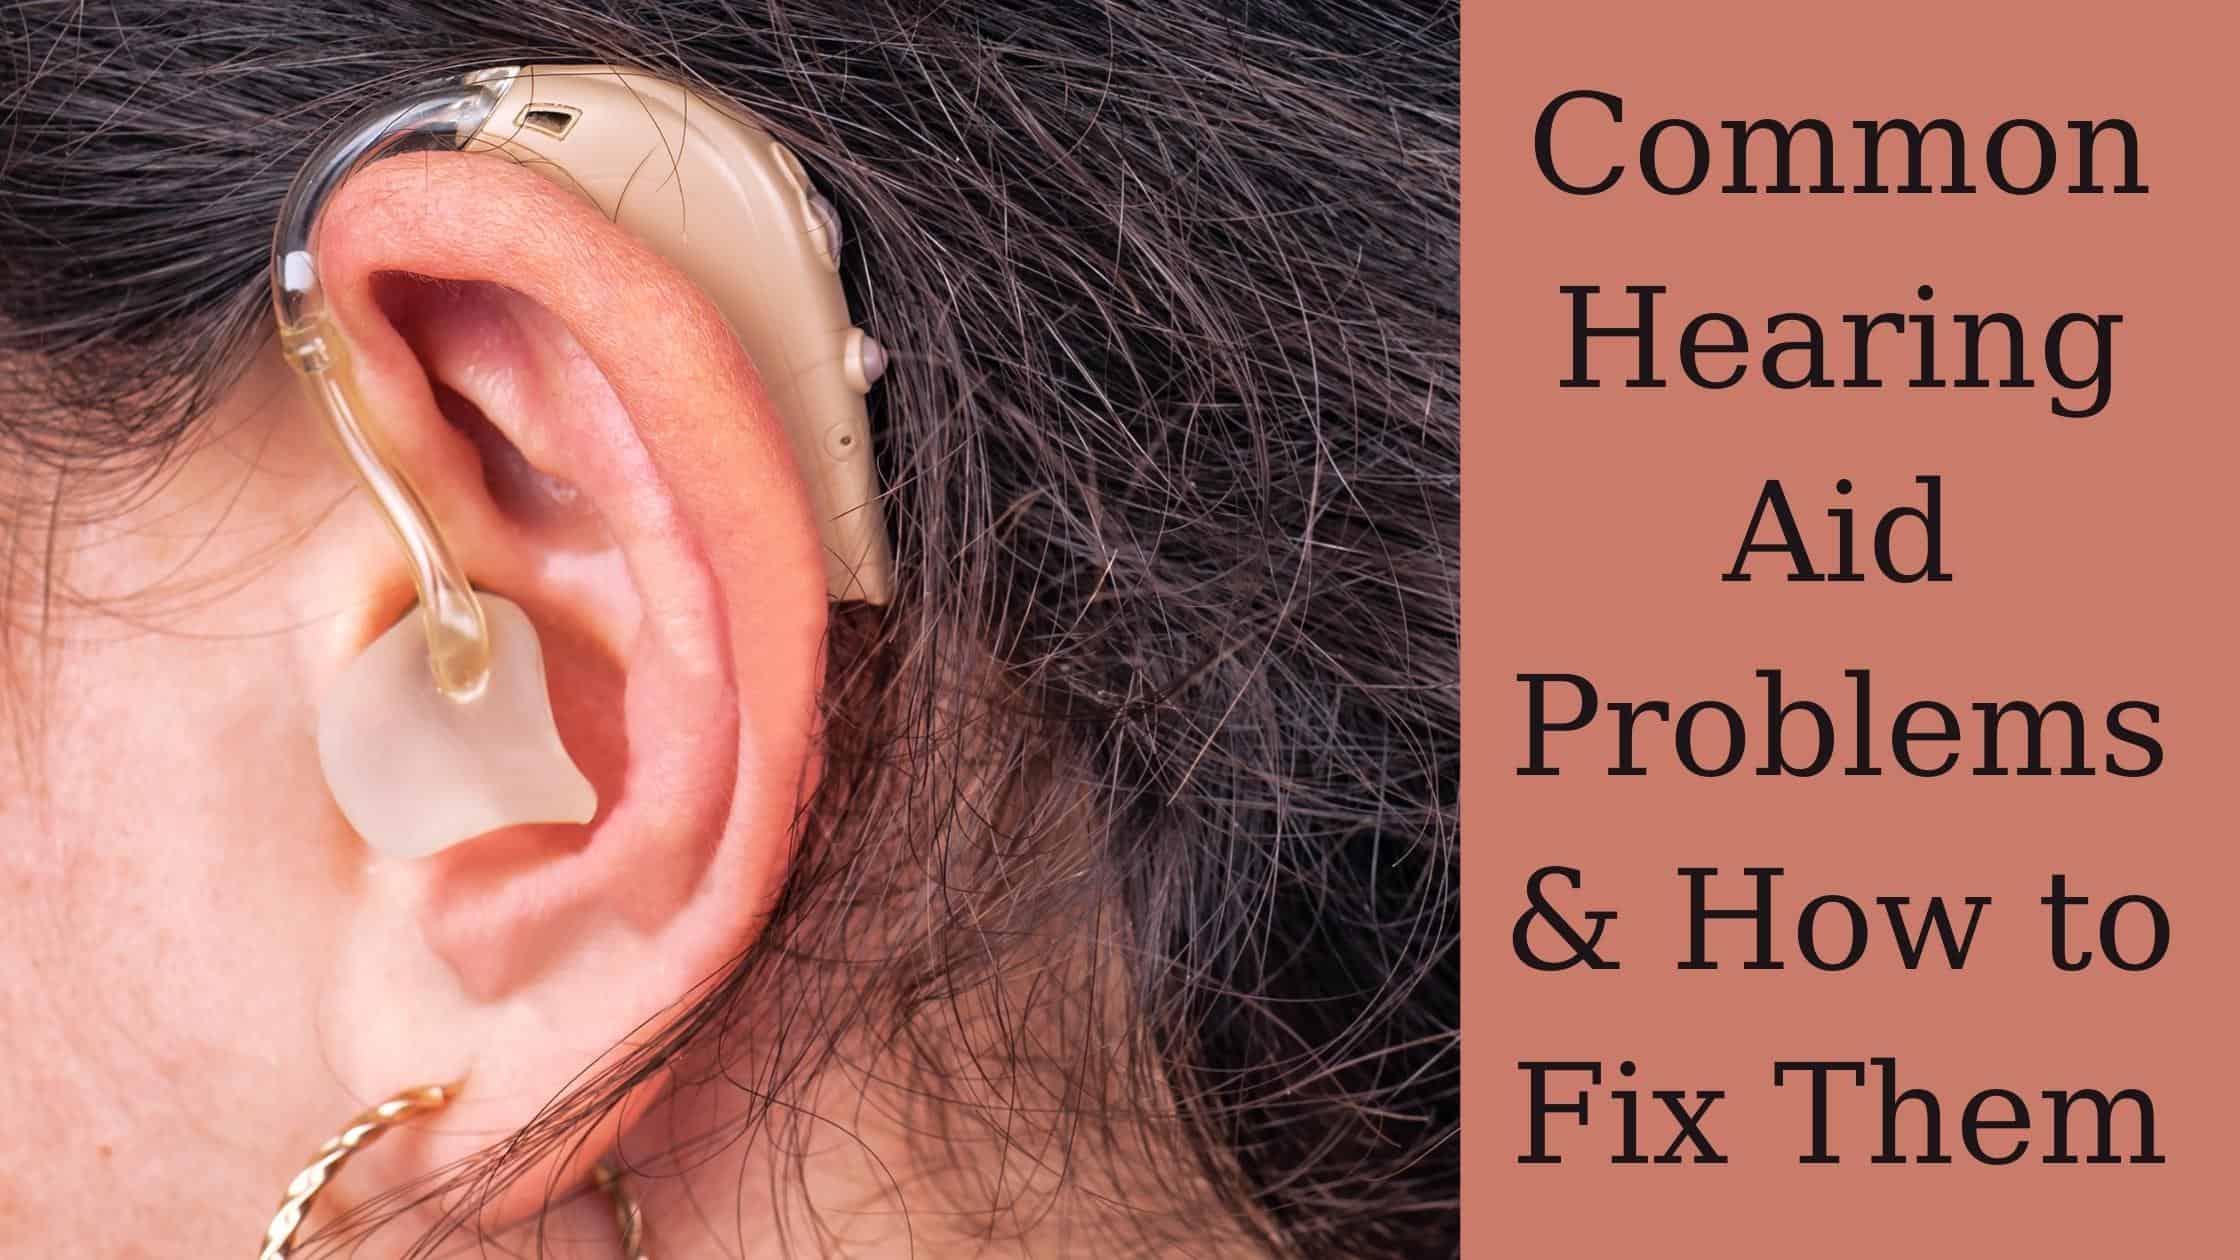 Featured image for “Common Hearing Aid Problems & How to Fix Them”